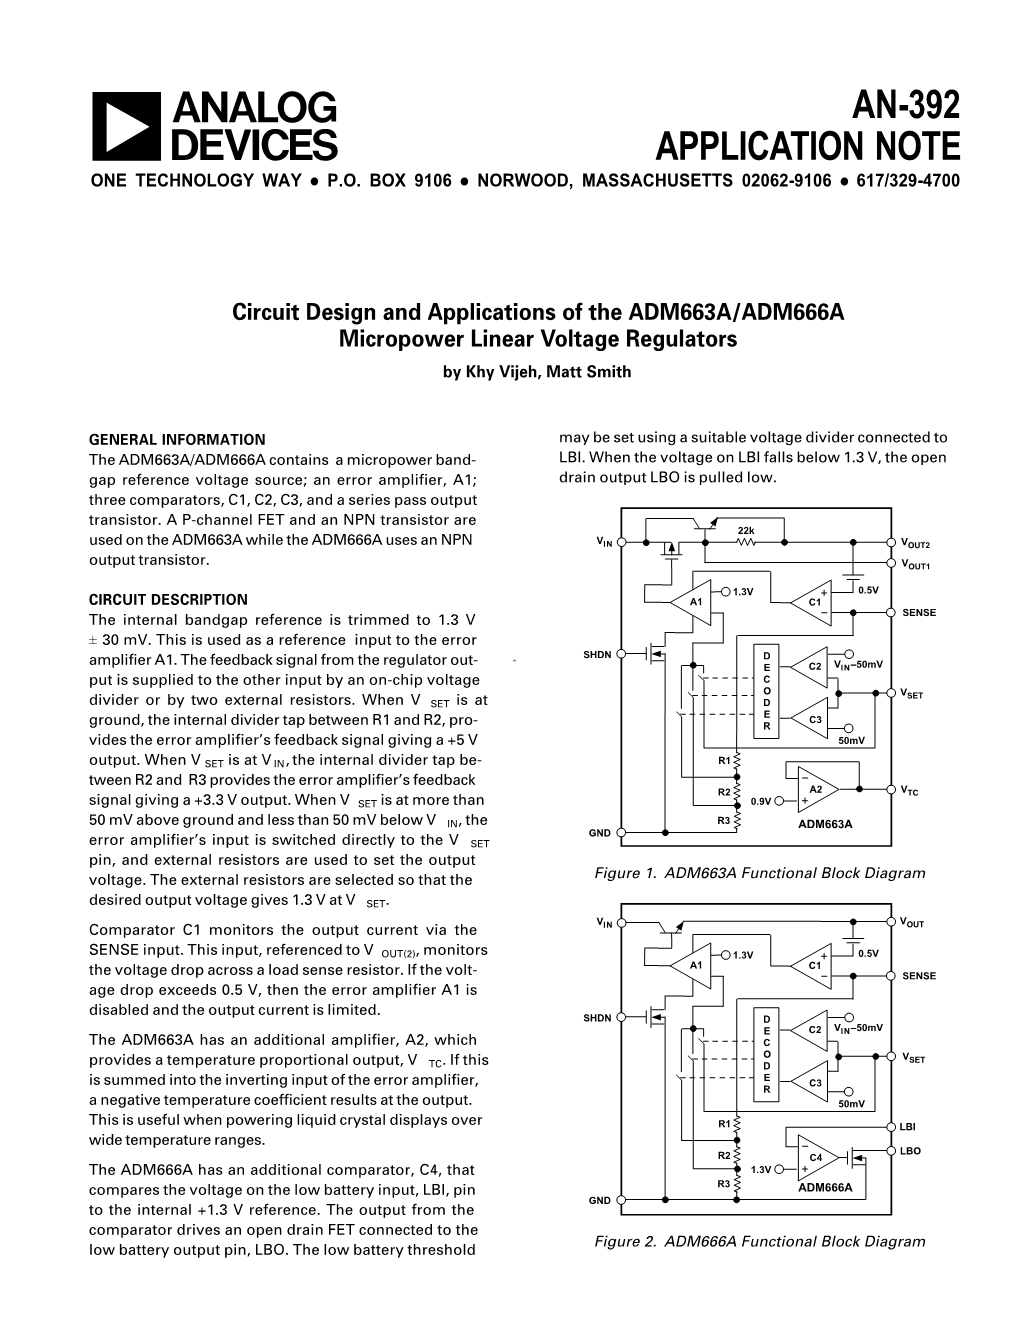 Circuit Design and Applications of the ADM663A/ADM666A Micropower Linear Voltage Regulators by Khy Vijeh, Matt Smith